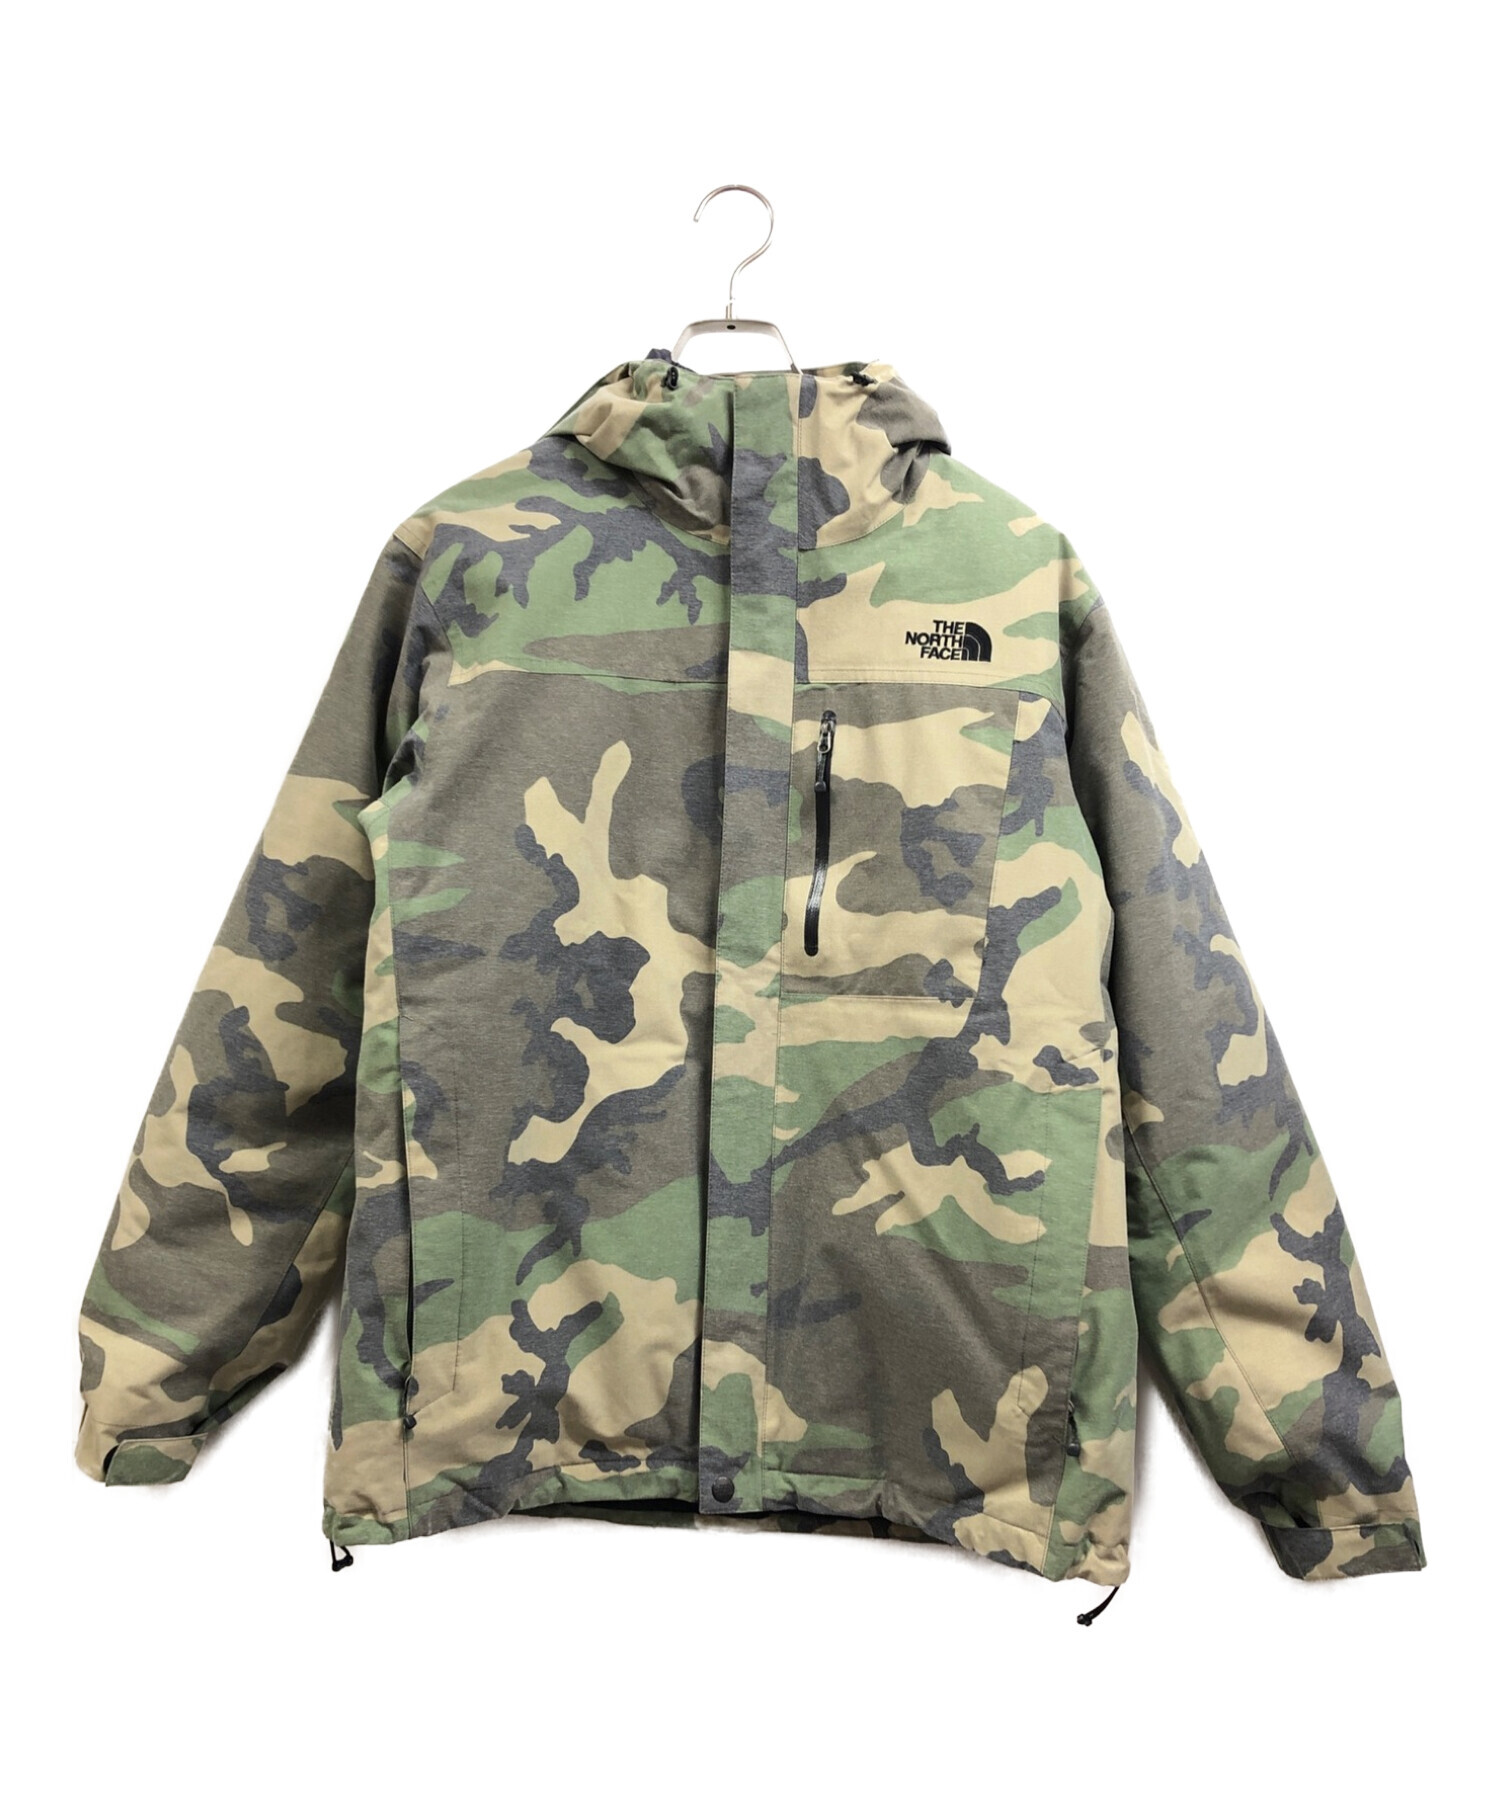 THE NORTH FACE (ザ ノース フェイス) NOVELTY CASSIUS TRICLIMATE JACKET カーキ サイズ:L